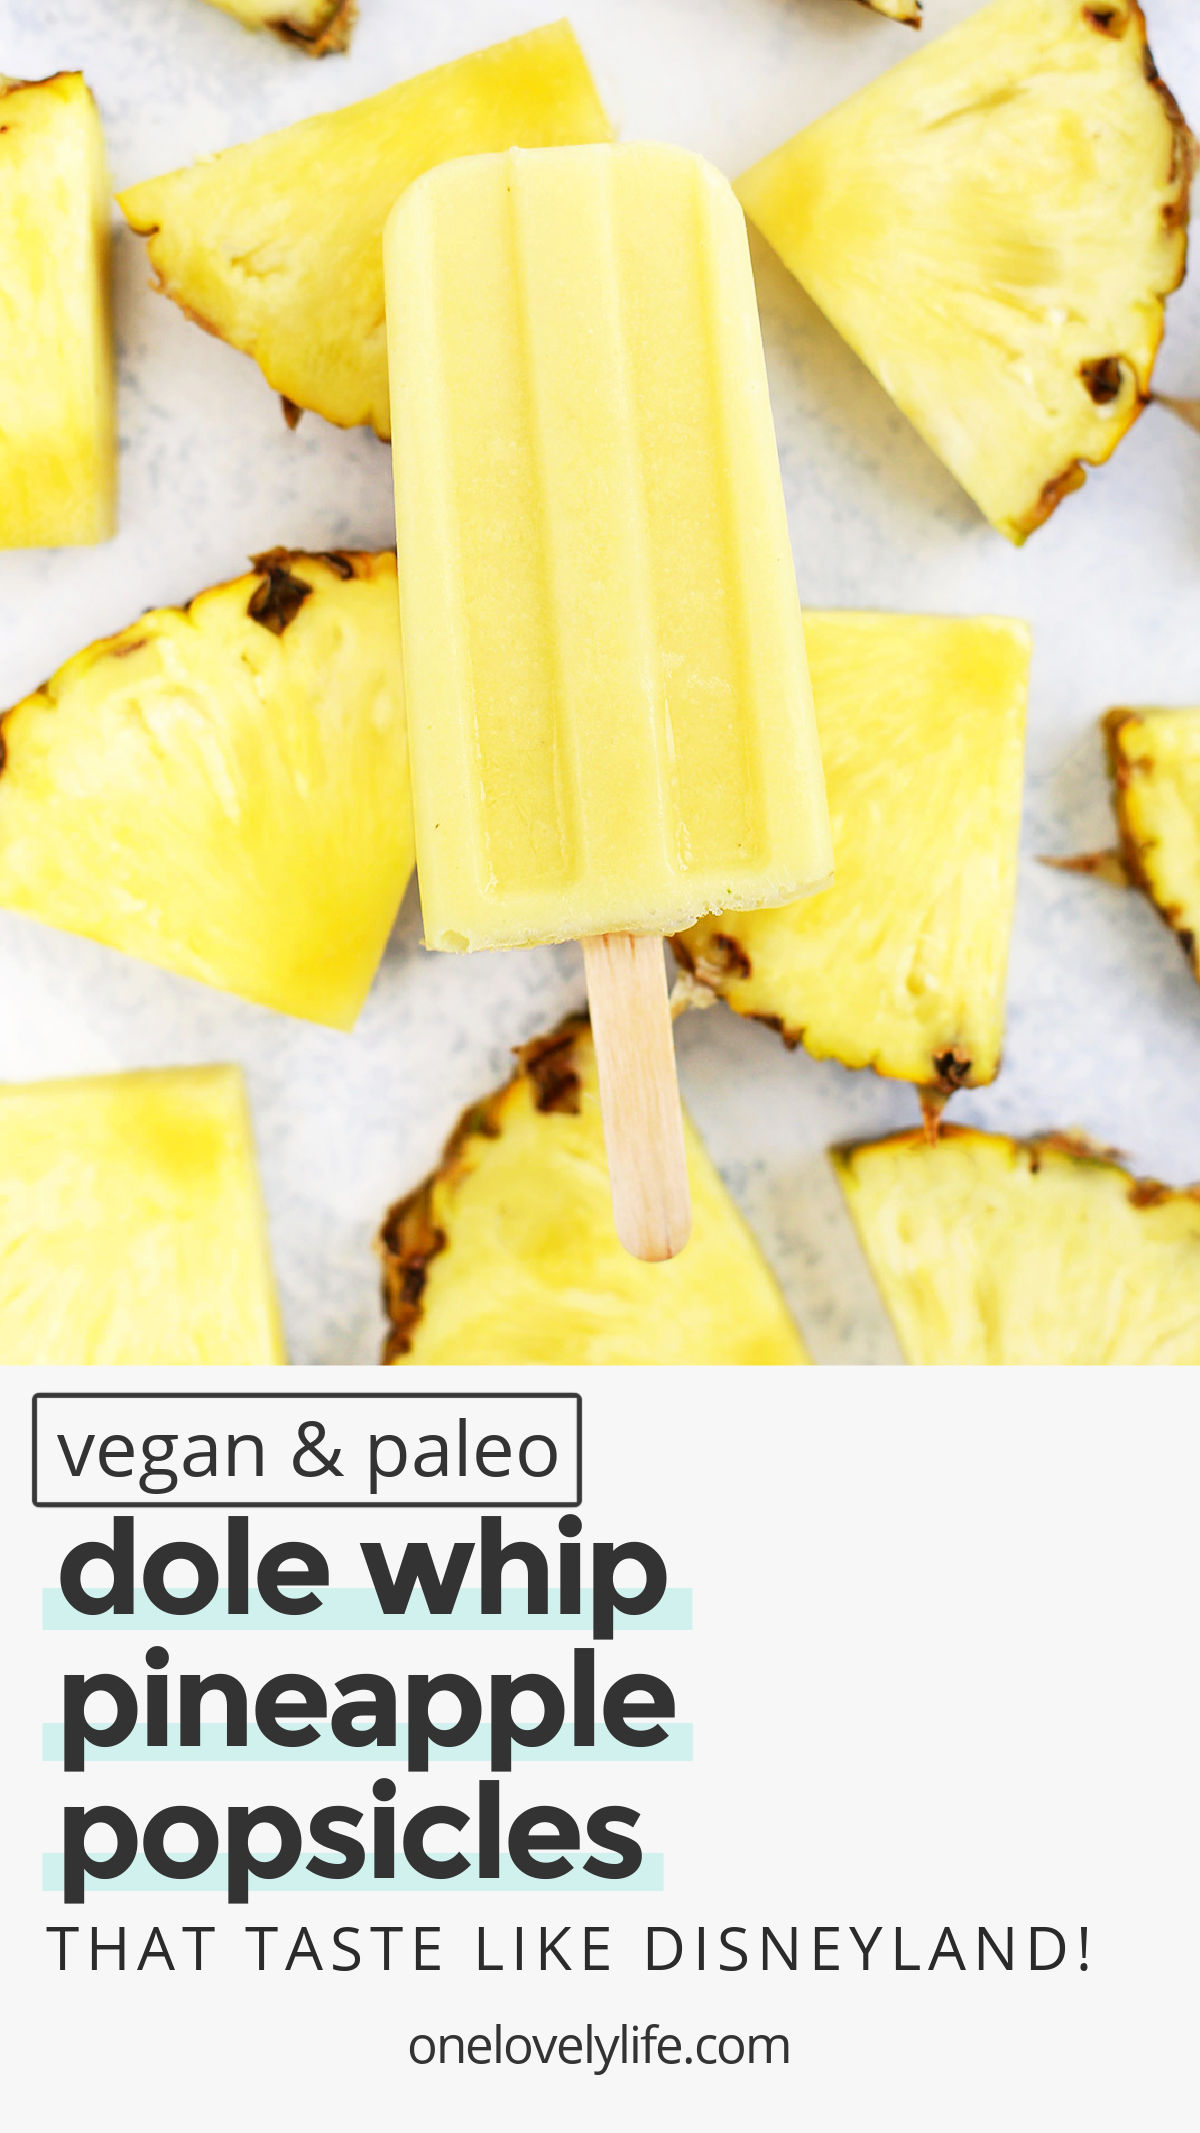 Vegan & Paleo DOLE WHIP Popsicles - 3 ingredients, naturally sweetened, and SO GOOD! These pineapple popsicles taste like a Disney Dole Whip! // healthy pineapple popsicles // pineapple whip popsicles / vegan dole whip popsicles / paleo dole whip popsicles / creamy pineapple popsicles